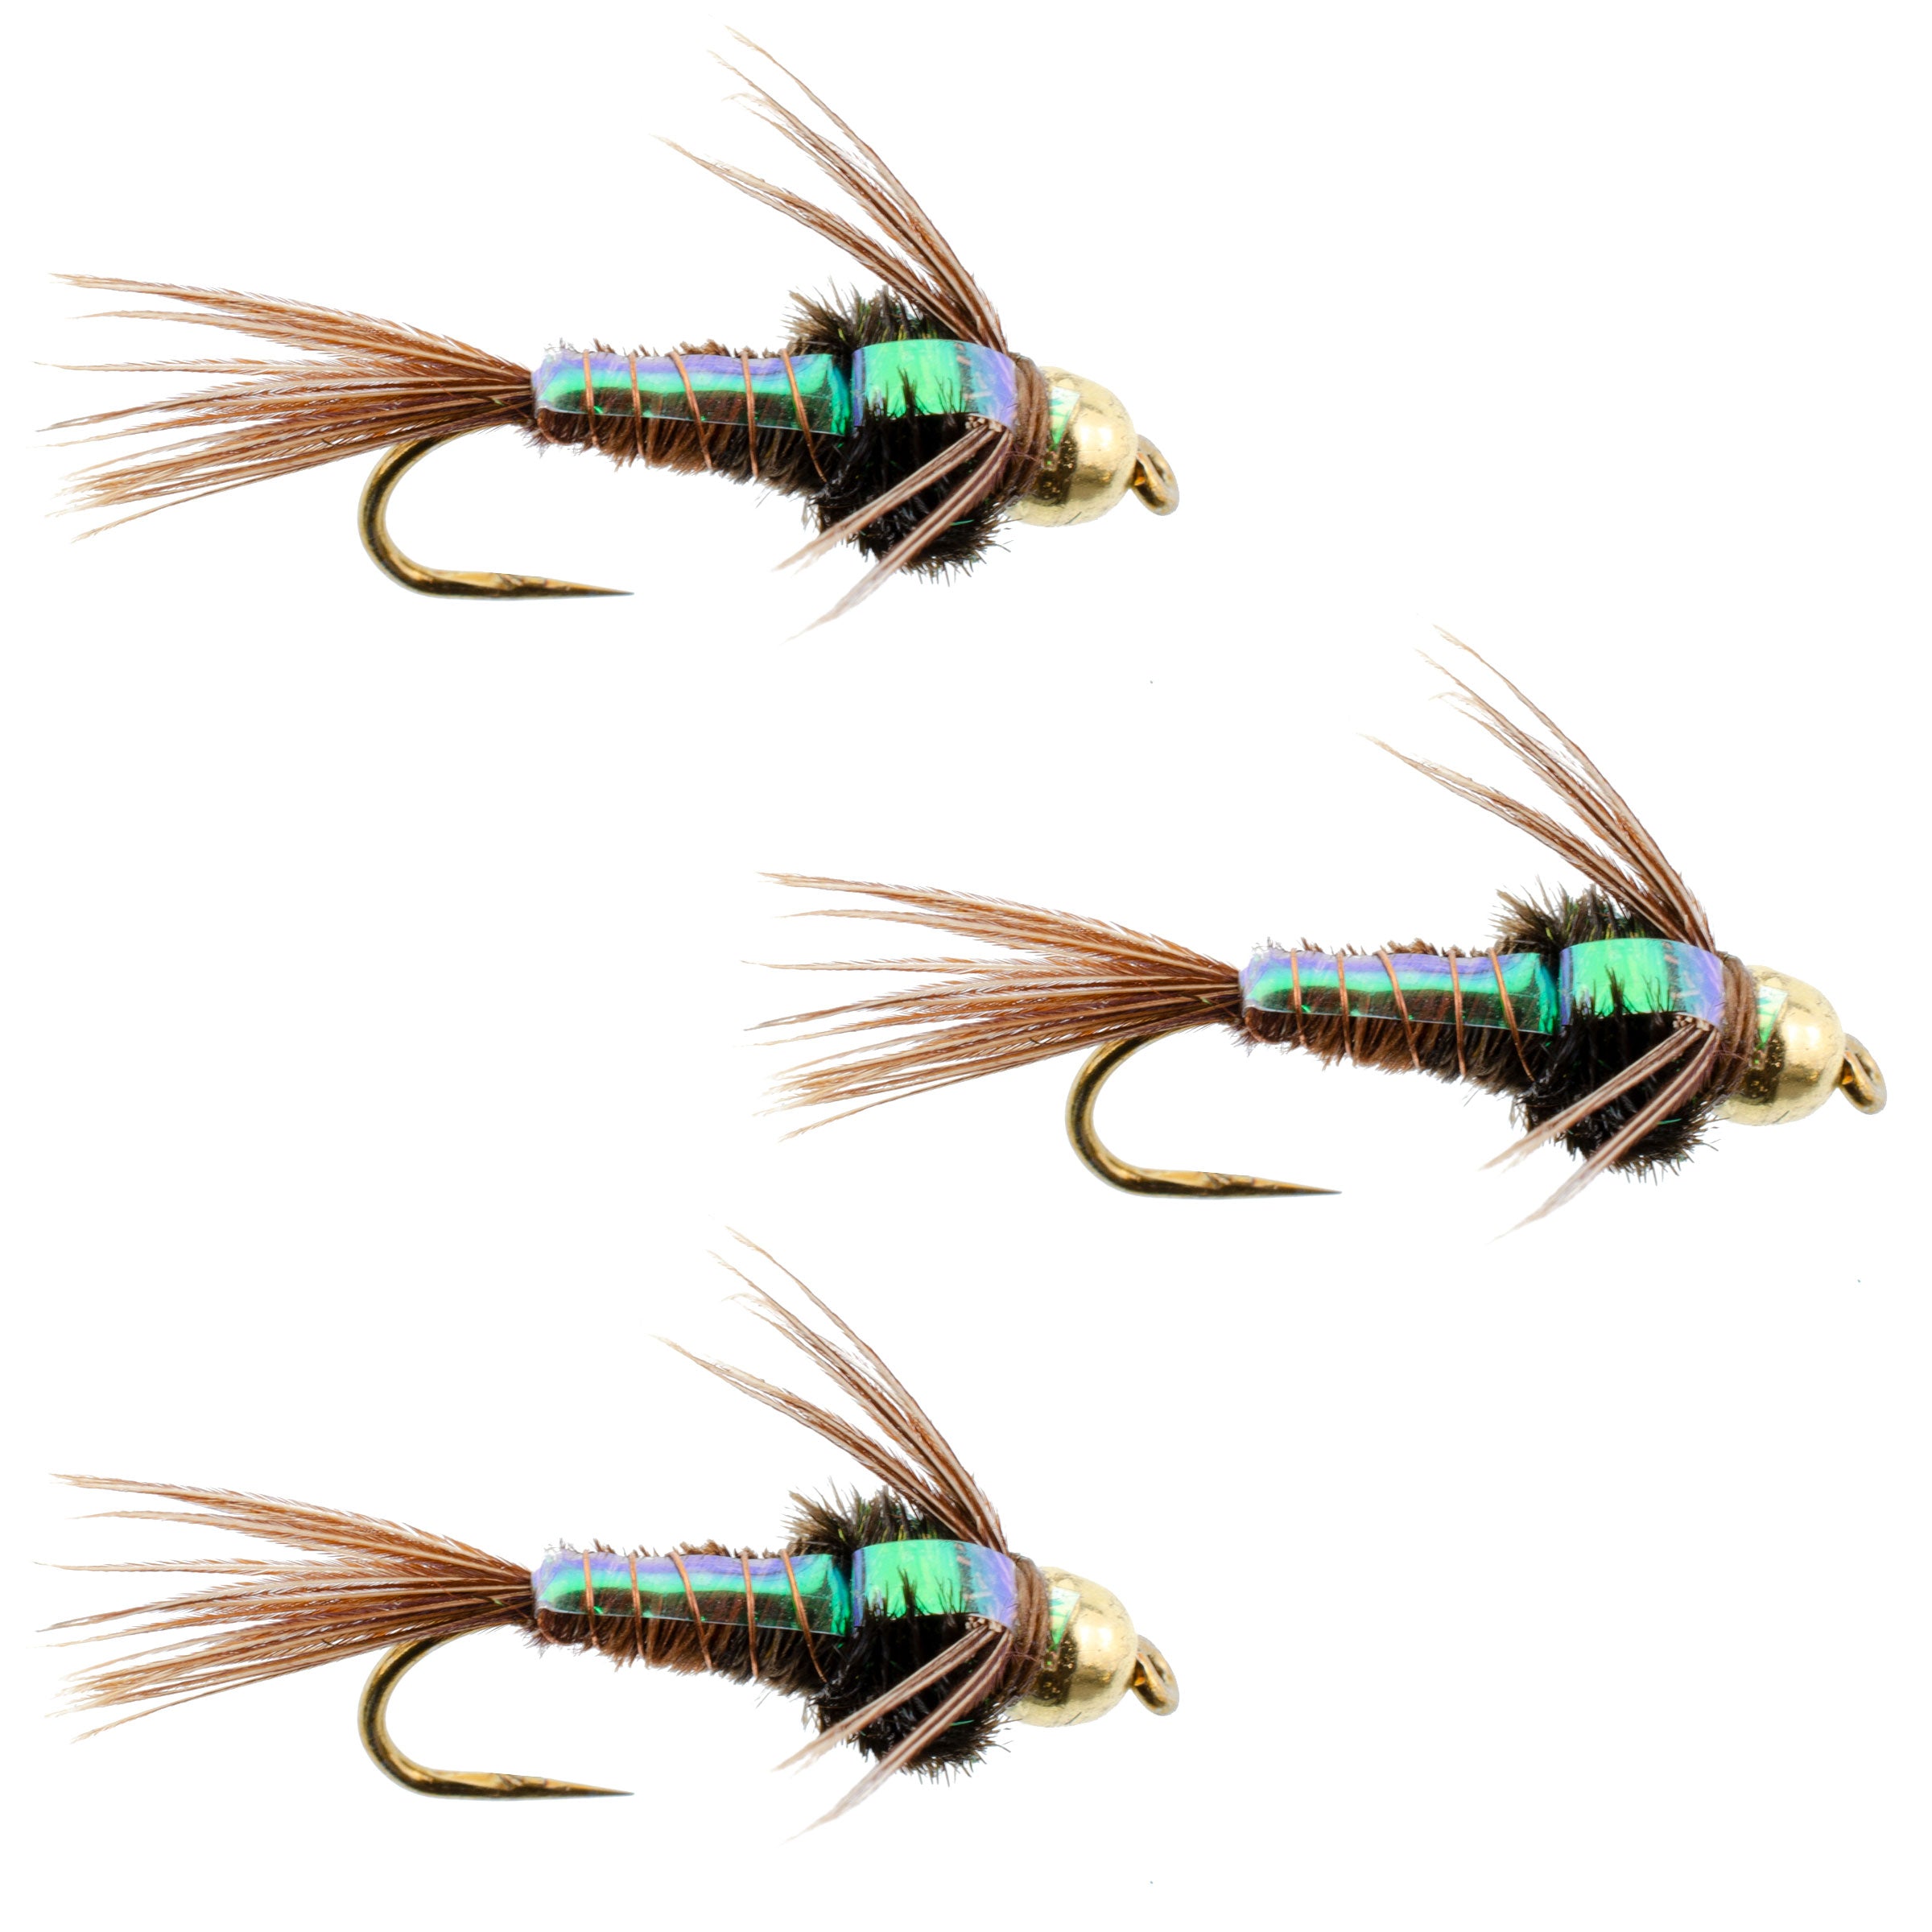 3 Pack Barbless Bead Head Flashback Pheasant Tail Nymph Flies Hook Size 18